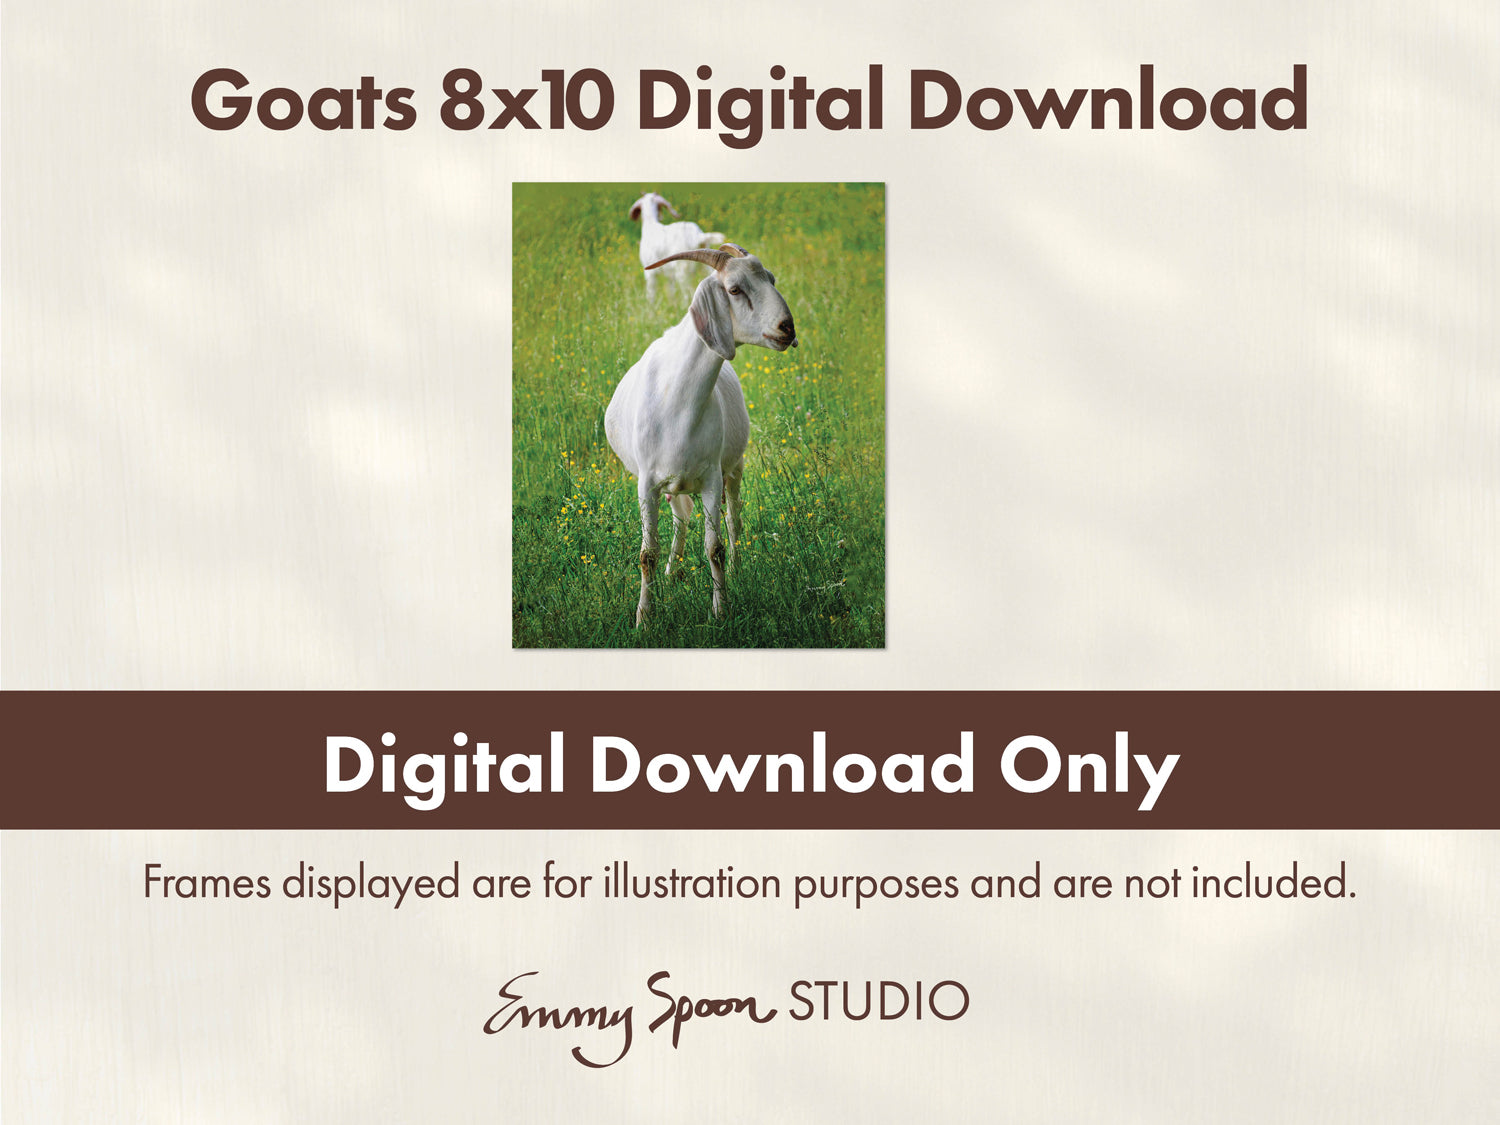 Goats 8x10 Digital Download by Emmy Spoon. Digital Download Only. Frames are for Illustrative purposes and are not included.